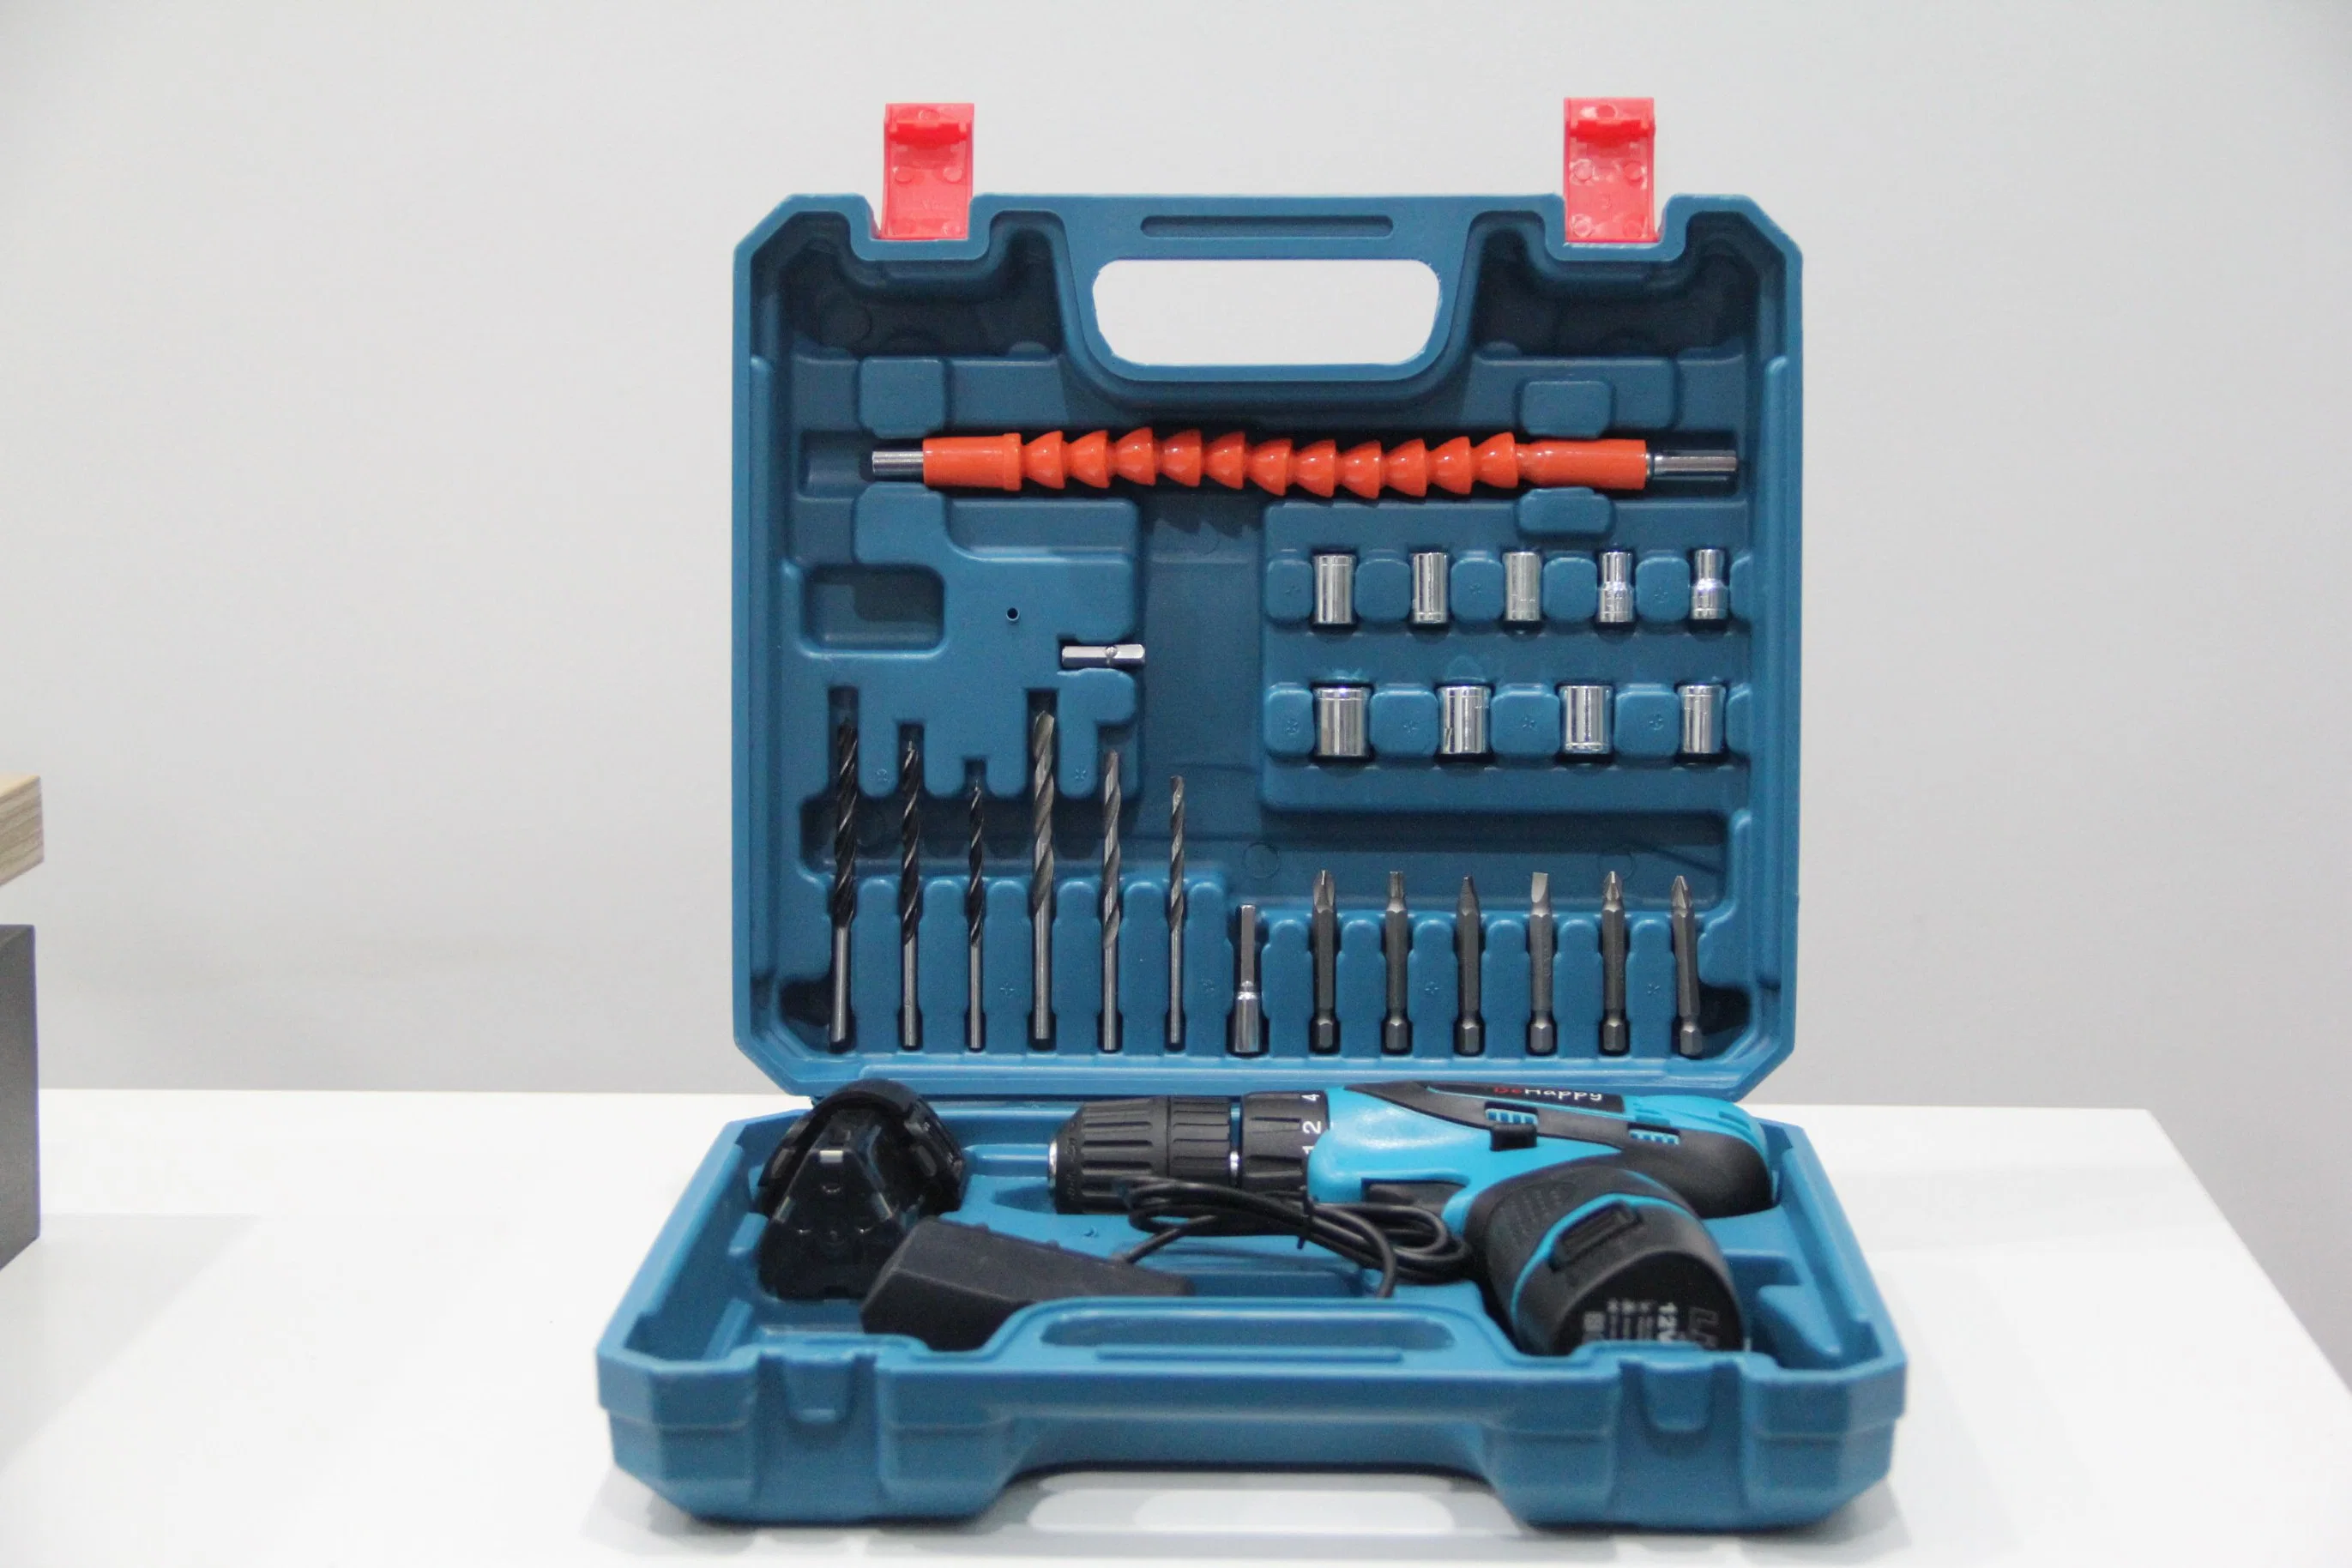 10% off Coreless Hand Drill Tools for Family Electric Power Tools Set Power Tools